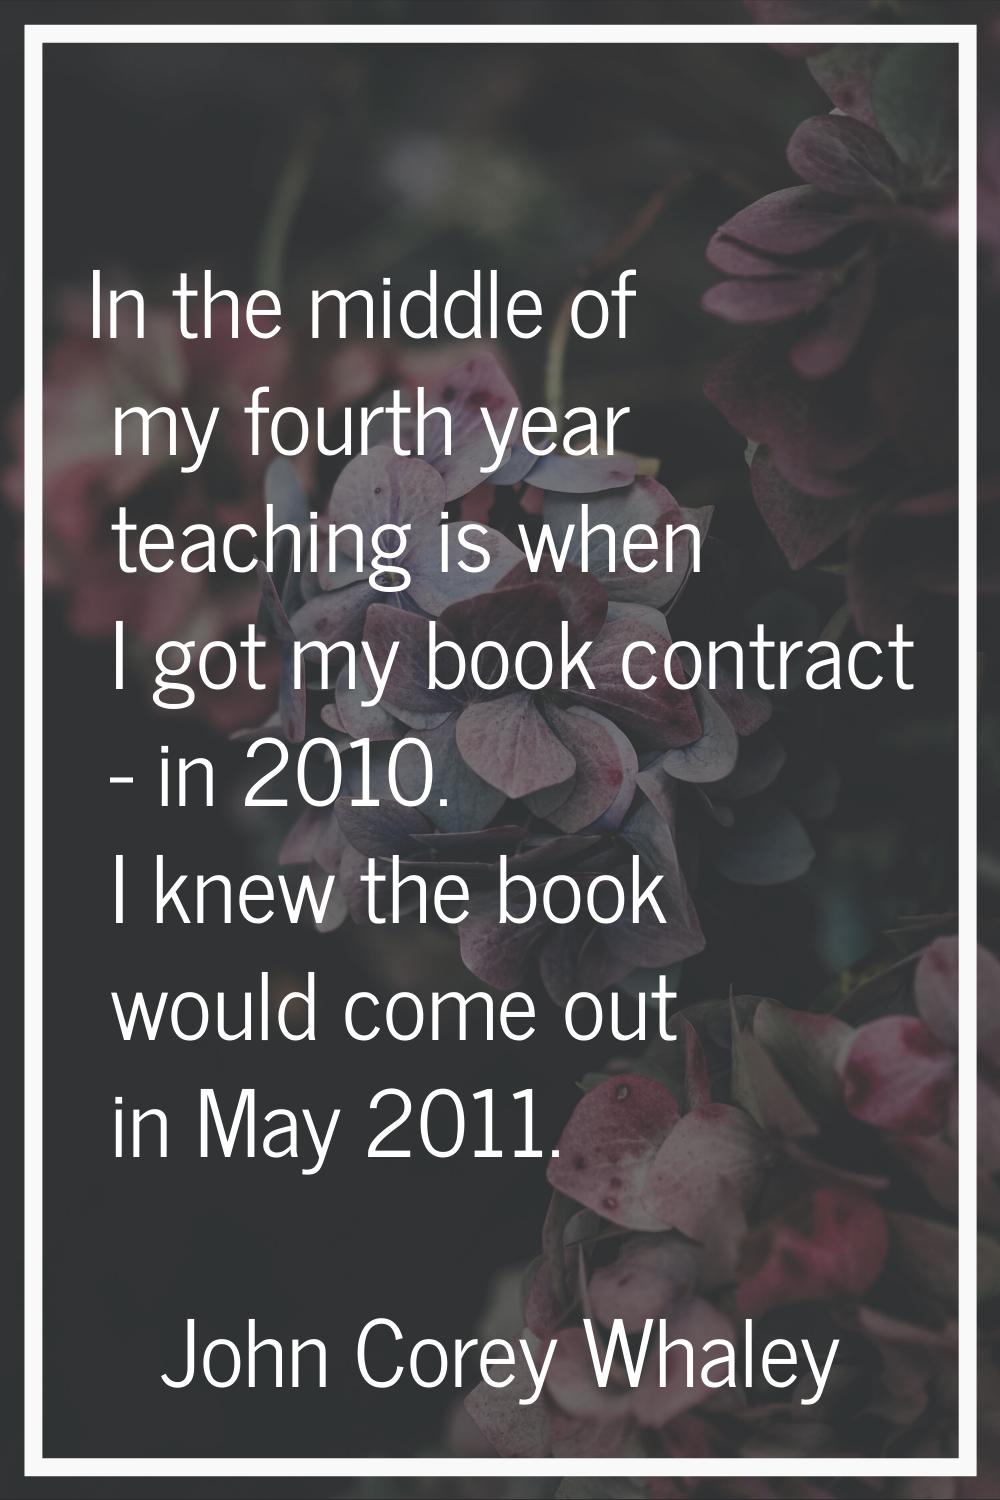 In the middle of my fourth year teaching is when I got my book contract - in 2010. I knew the book 